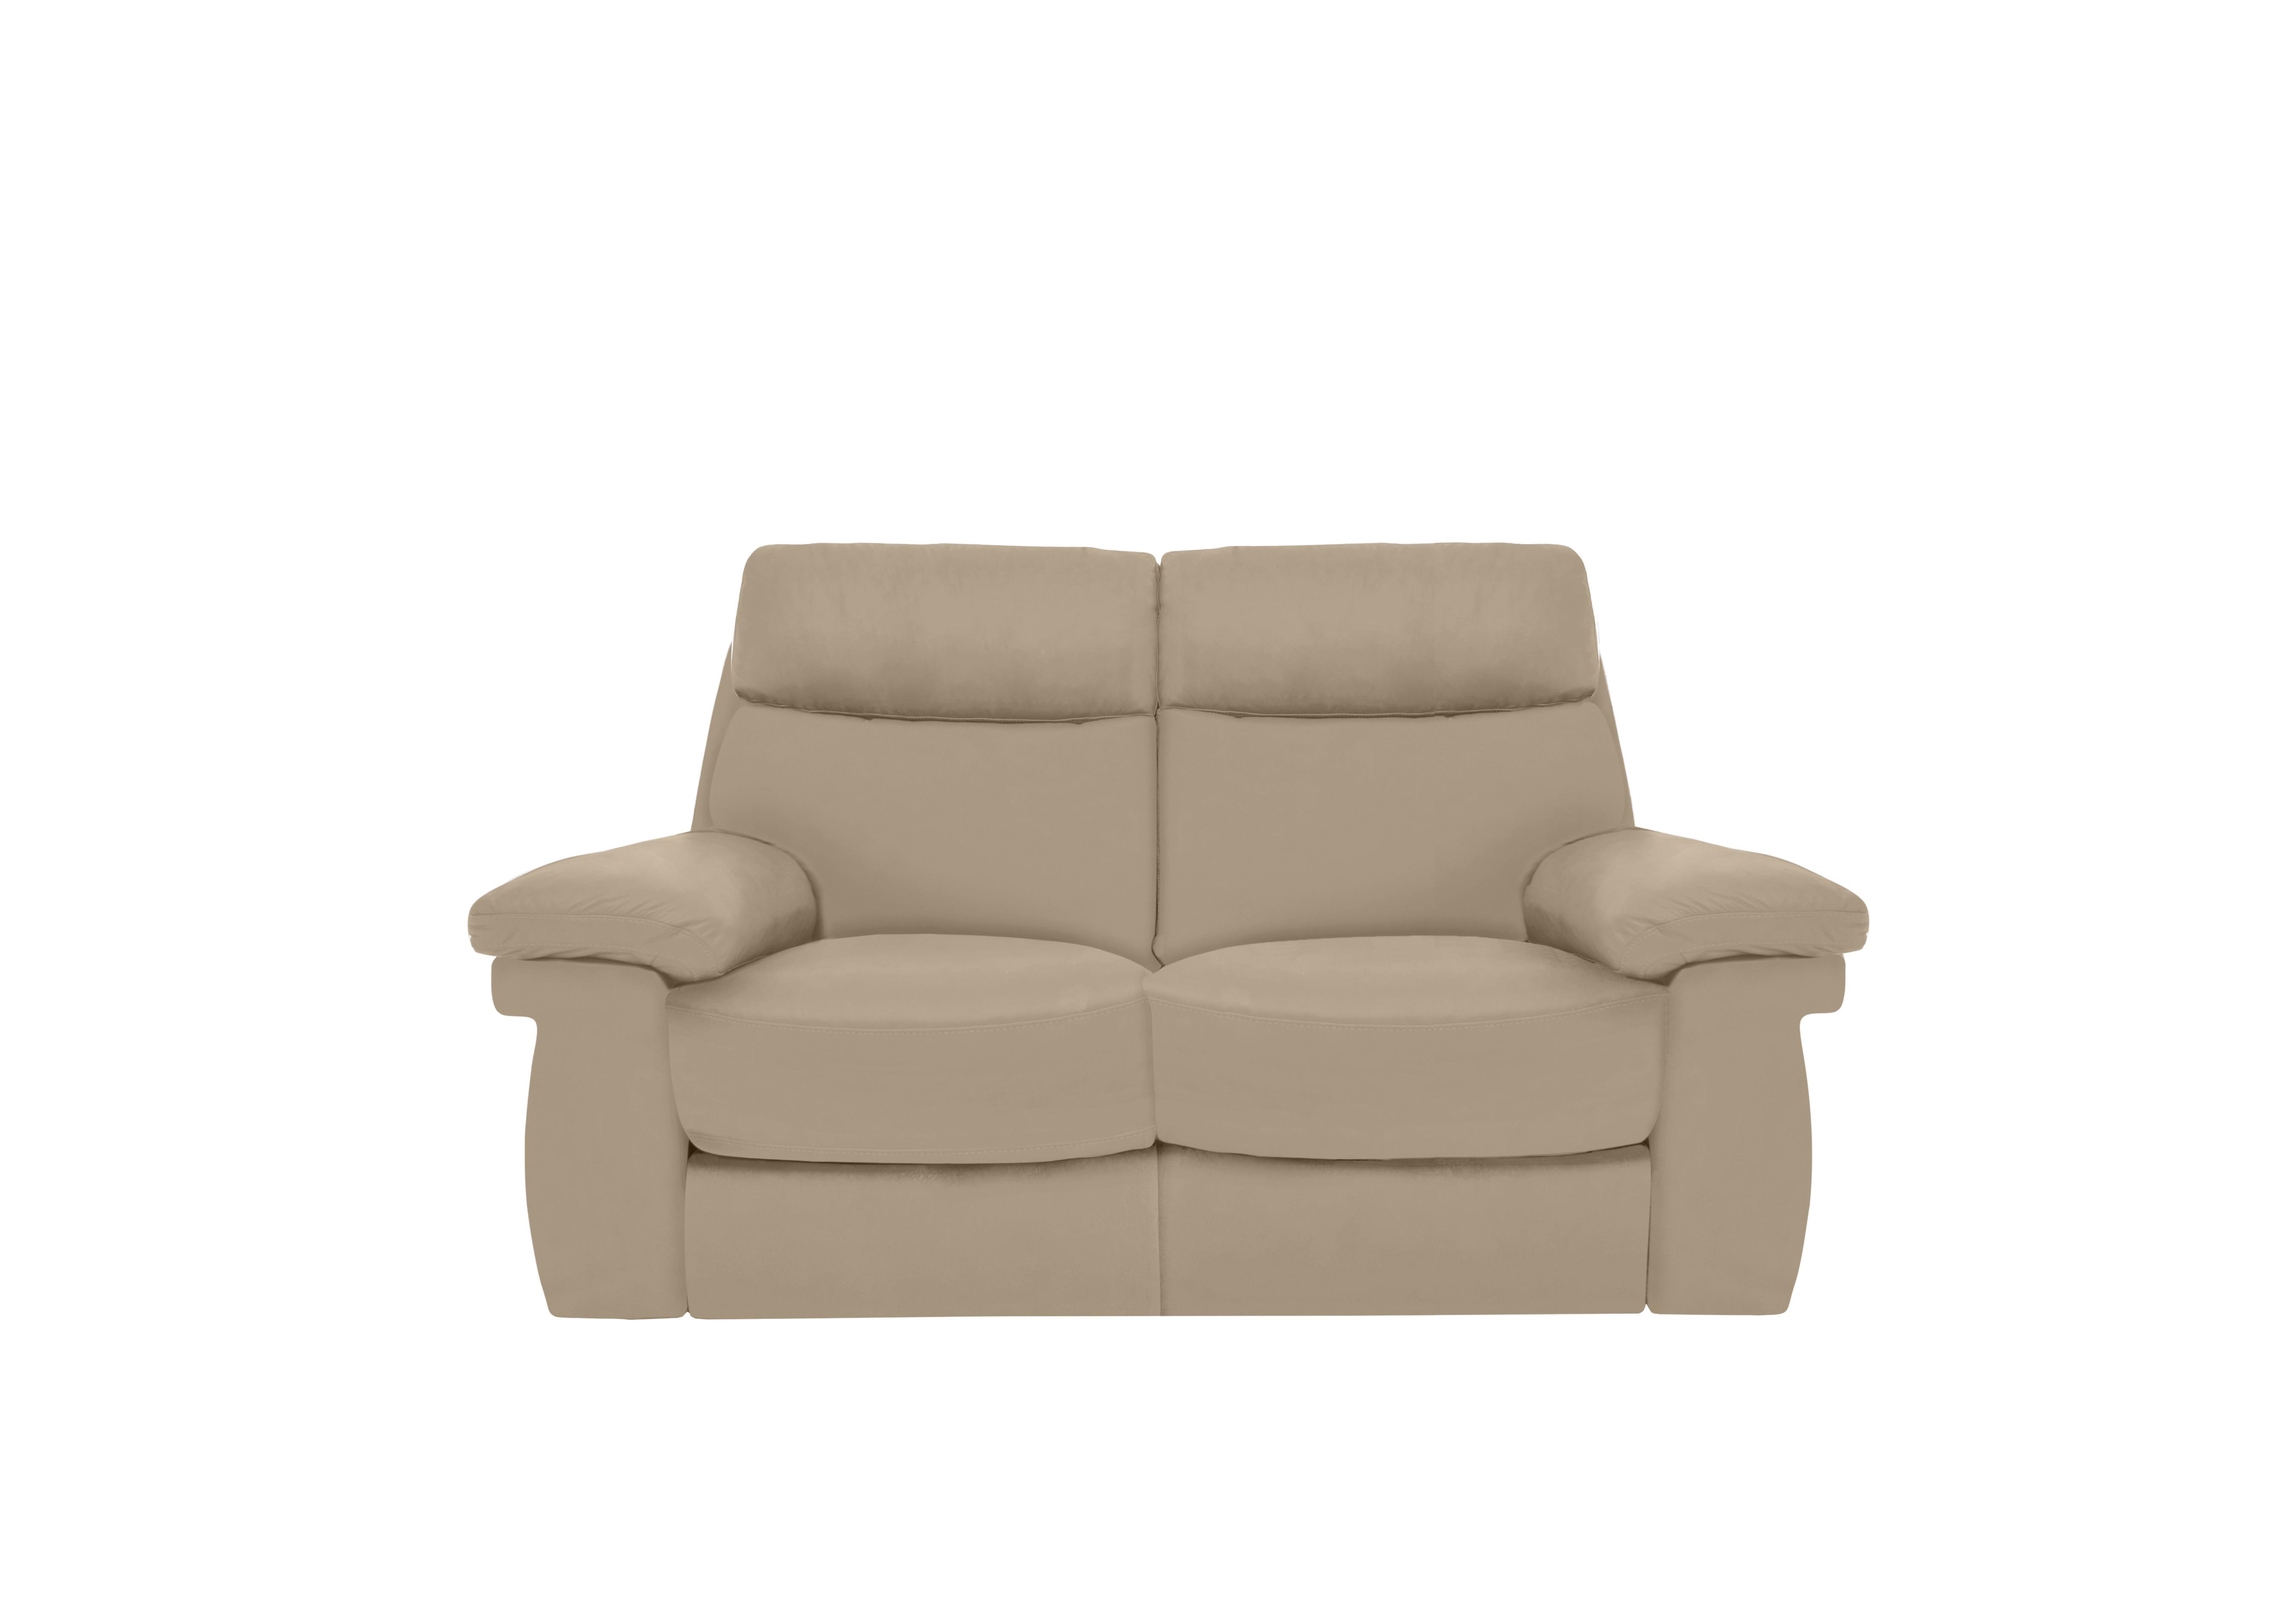 Serene 2 Seater Leather Power Recliner Sofa with Power Headrests and Power Lumbar in Bx-039c Pebble on Furniture Village